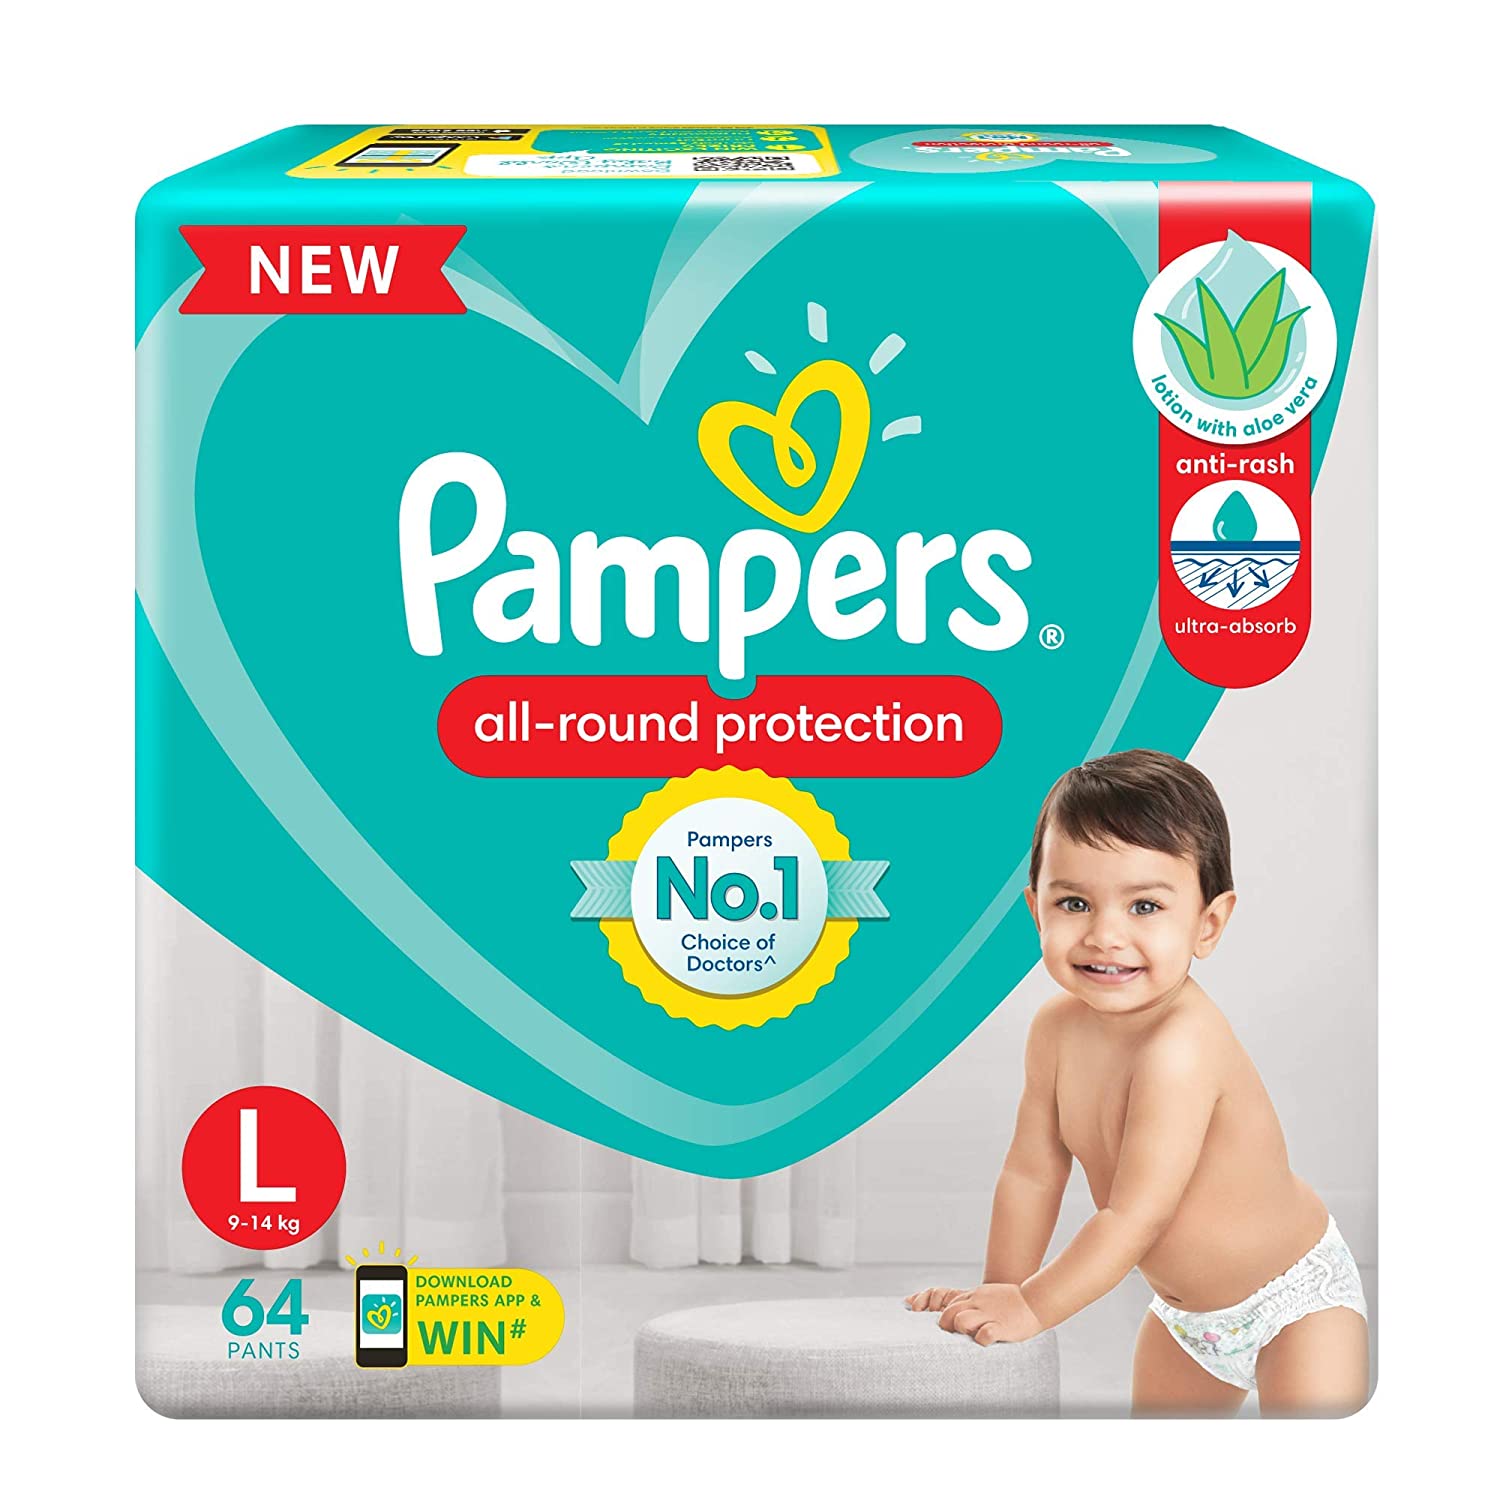 Buy Pampers New Diapers Pants Medium 76 Count  Pampers New Diapers Pants  Monthly Box Pack Large Pack of 128 Online at Low Prices in India  Amazon in